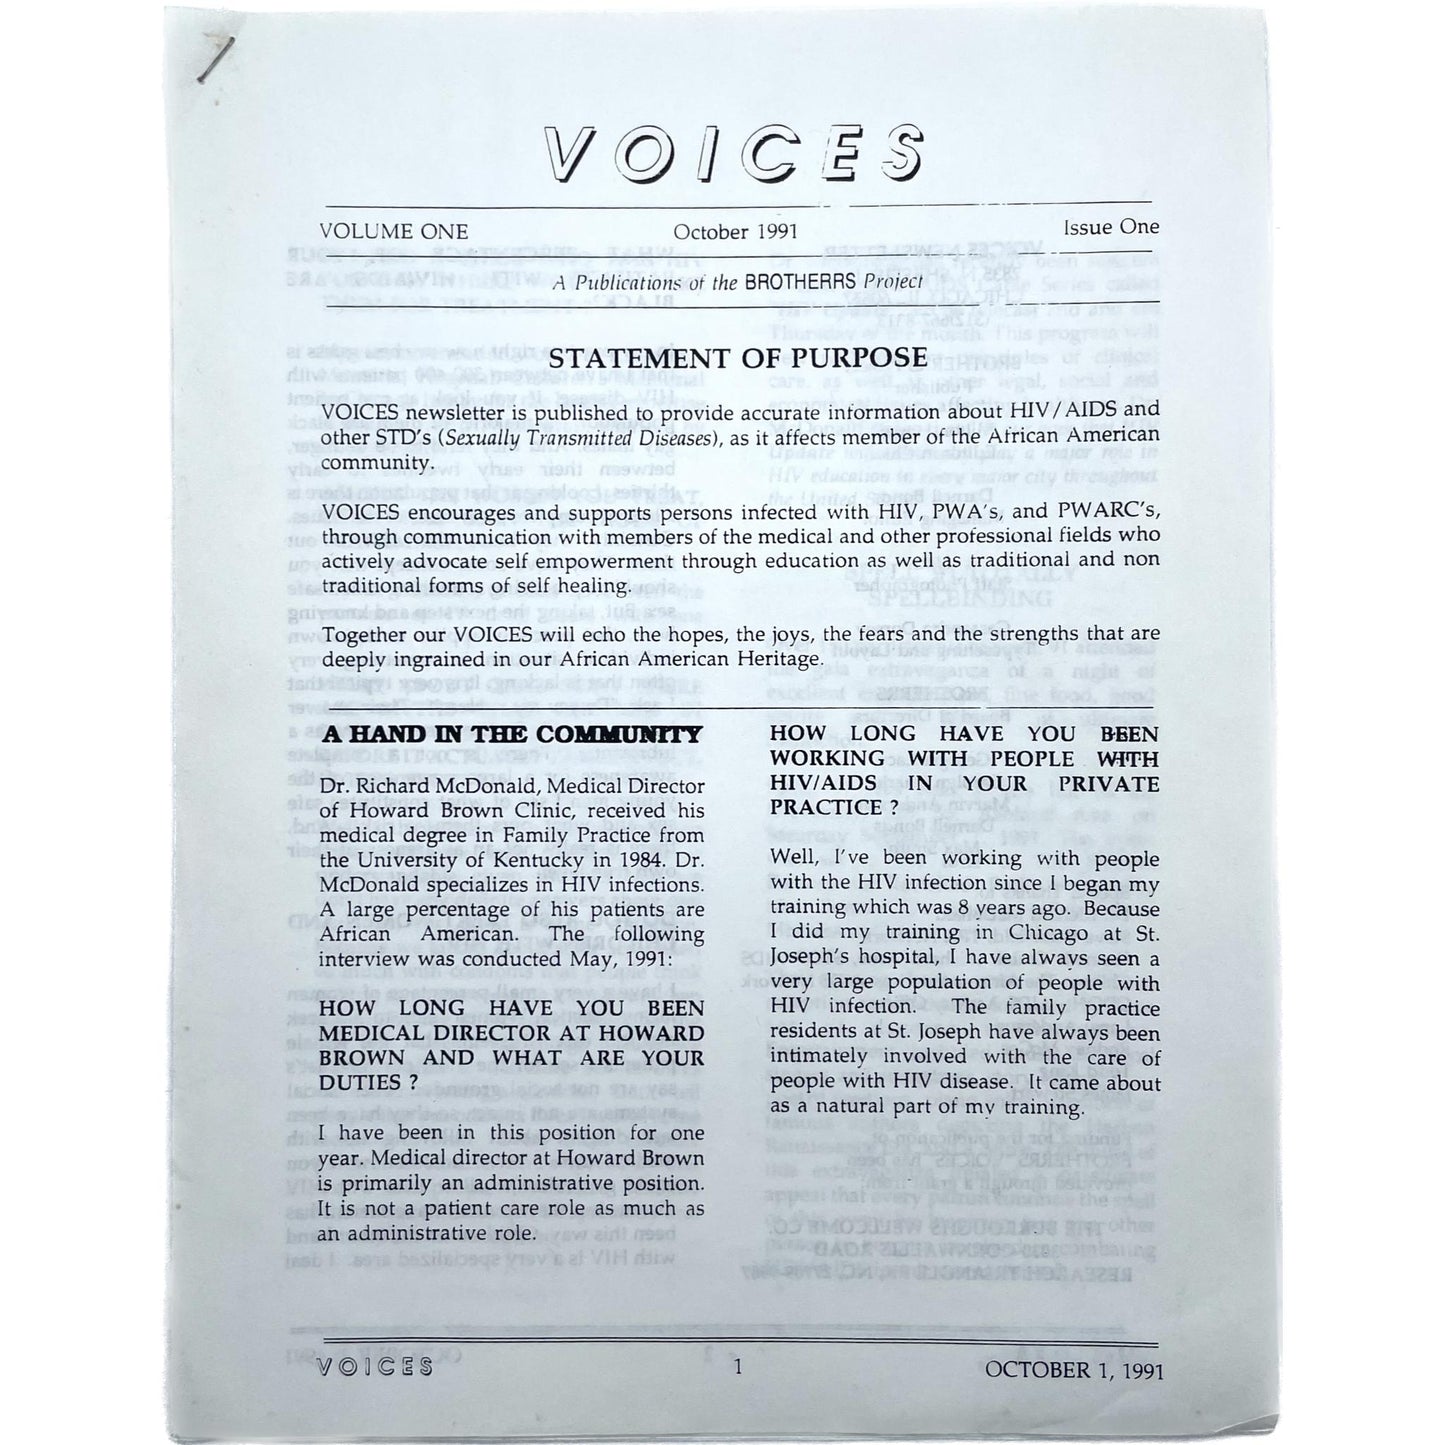 VOICES: A Publications [sic] of the BROTHERRS Project